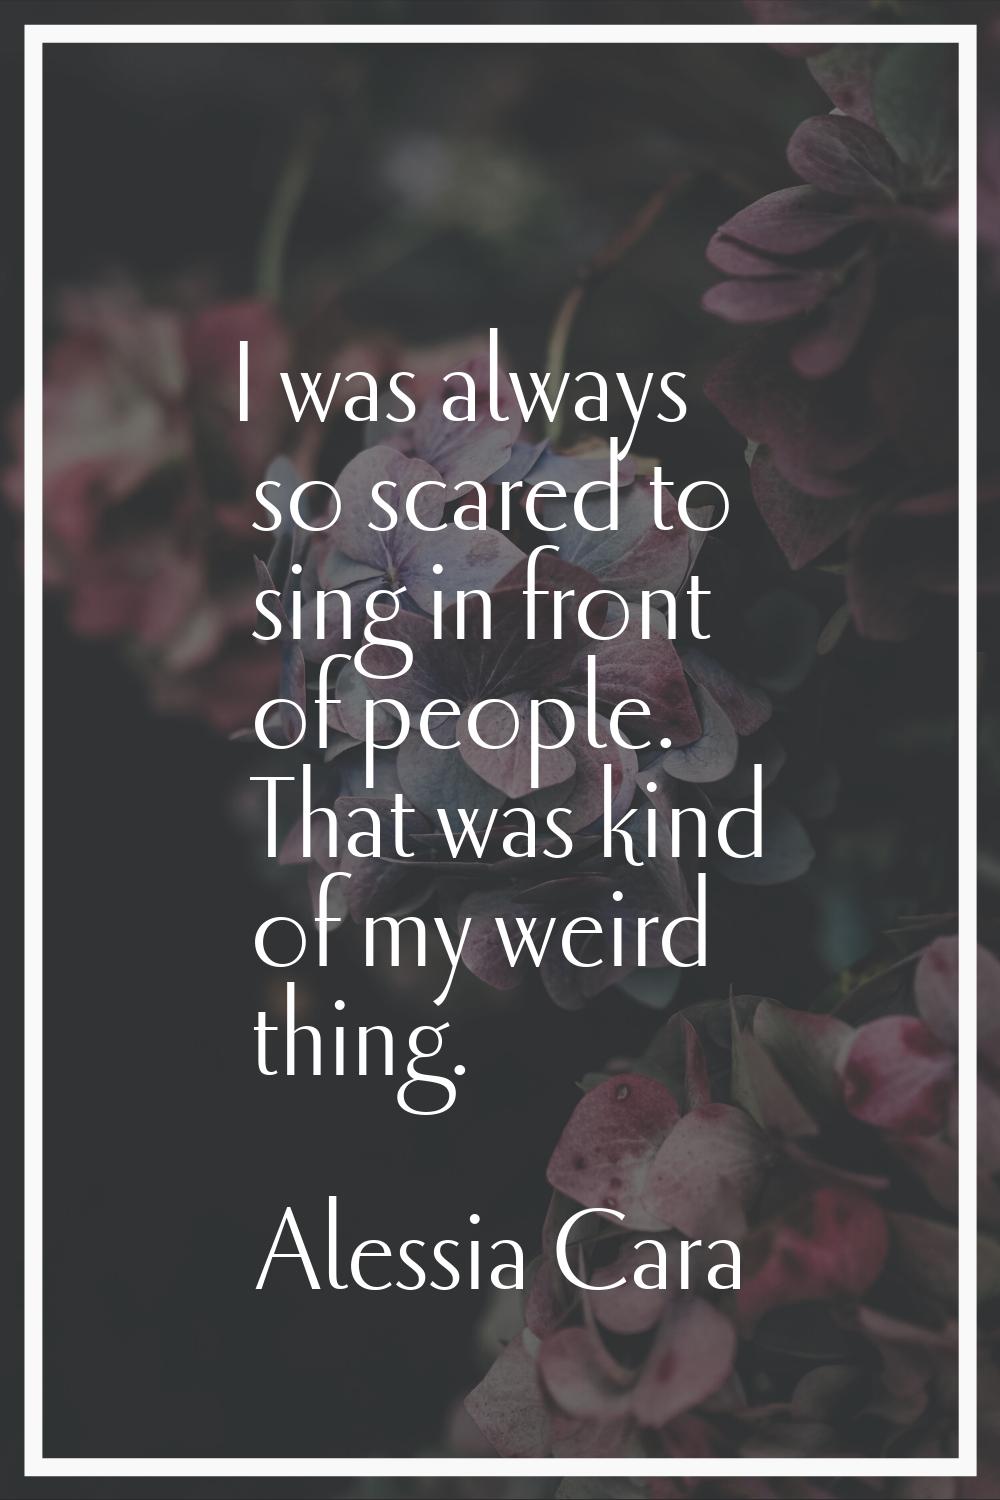 I was always so scared to sing in front of people. That was kind of my weird thing.